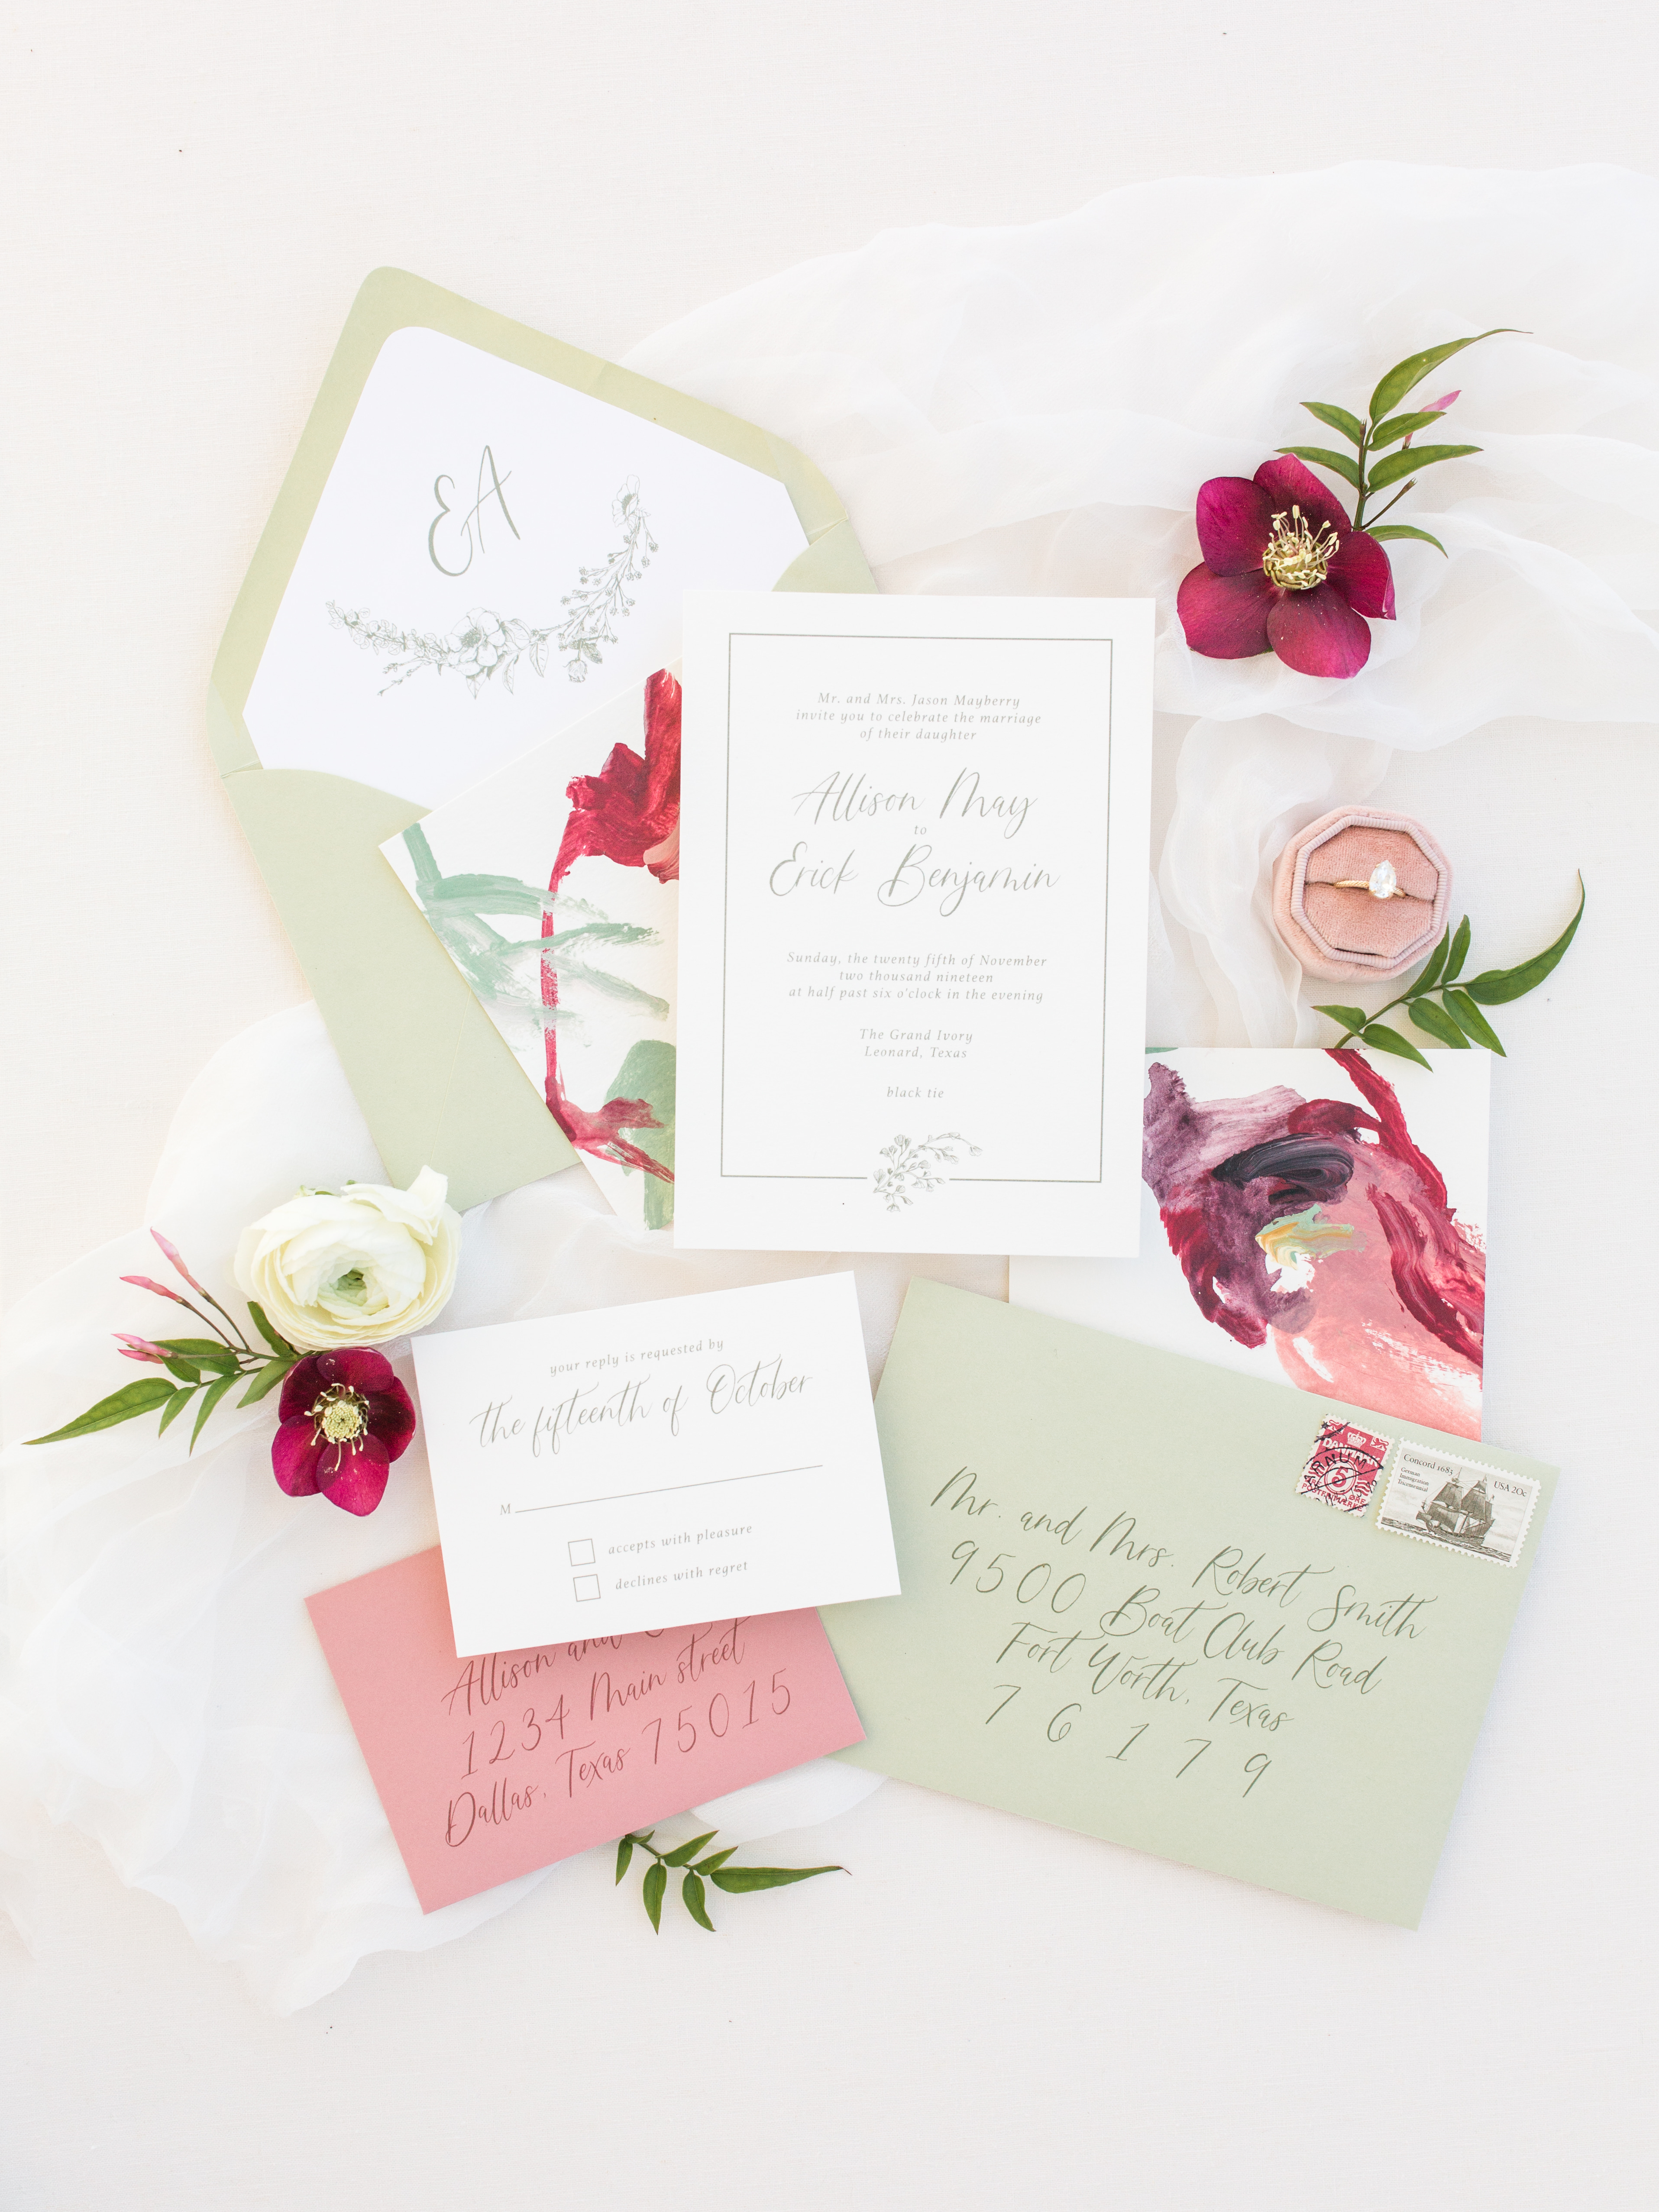 Blush floral stationary by Lane Love Paper Co. – Dallas Wedding Planner | Alexa Kay Events